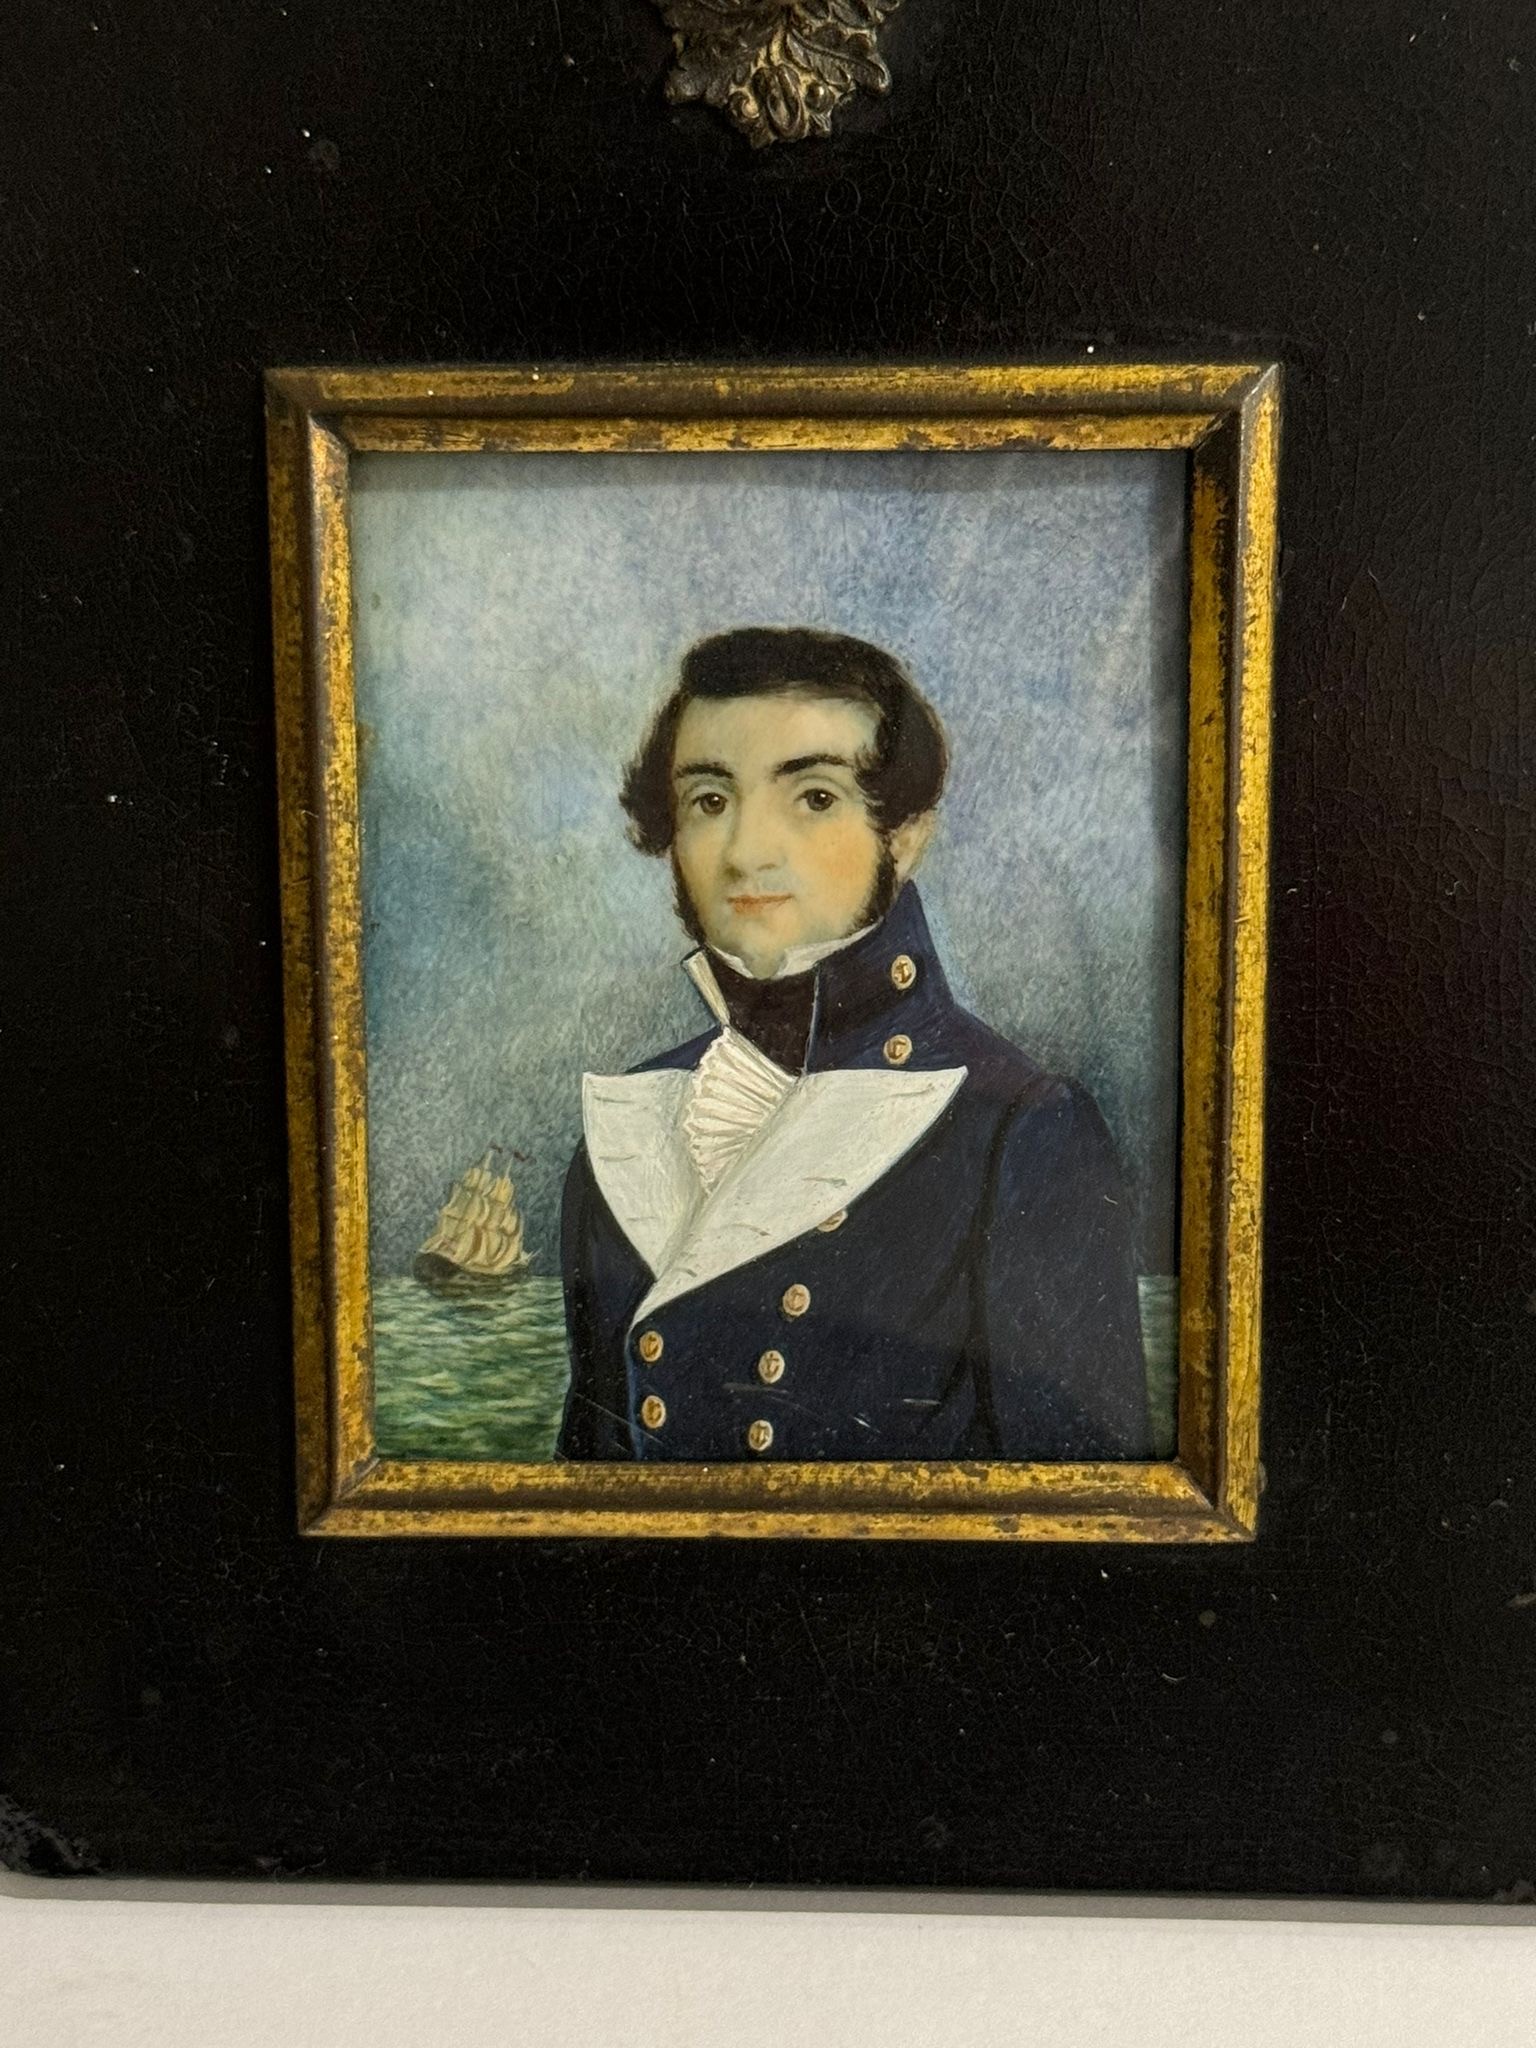 A Mid-19th century portrait miniature of a Naval Midshipman, with black wavy hair wand sides brushed